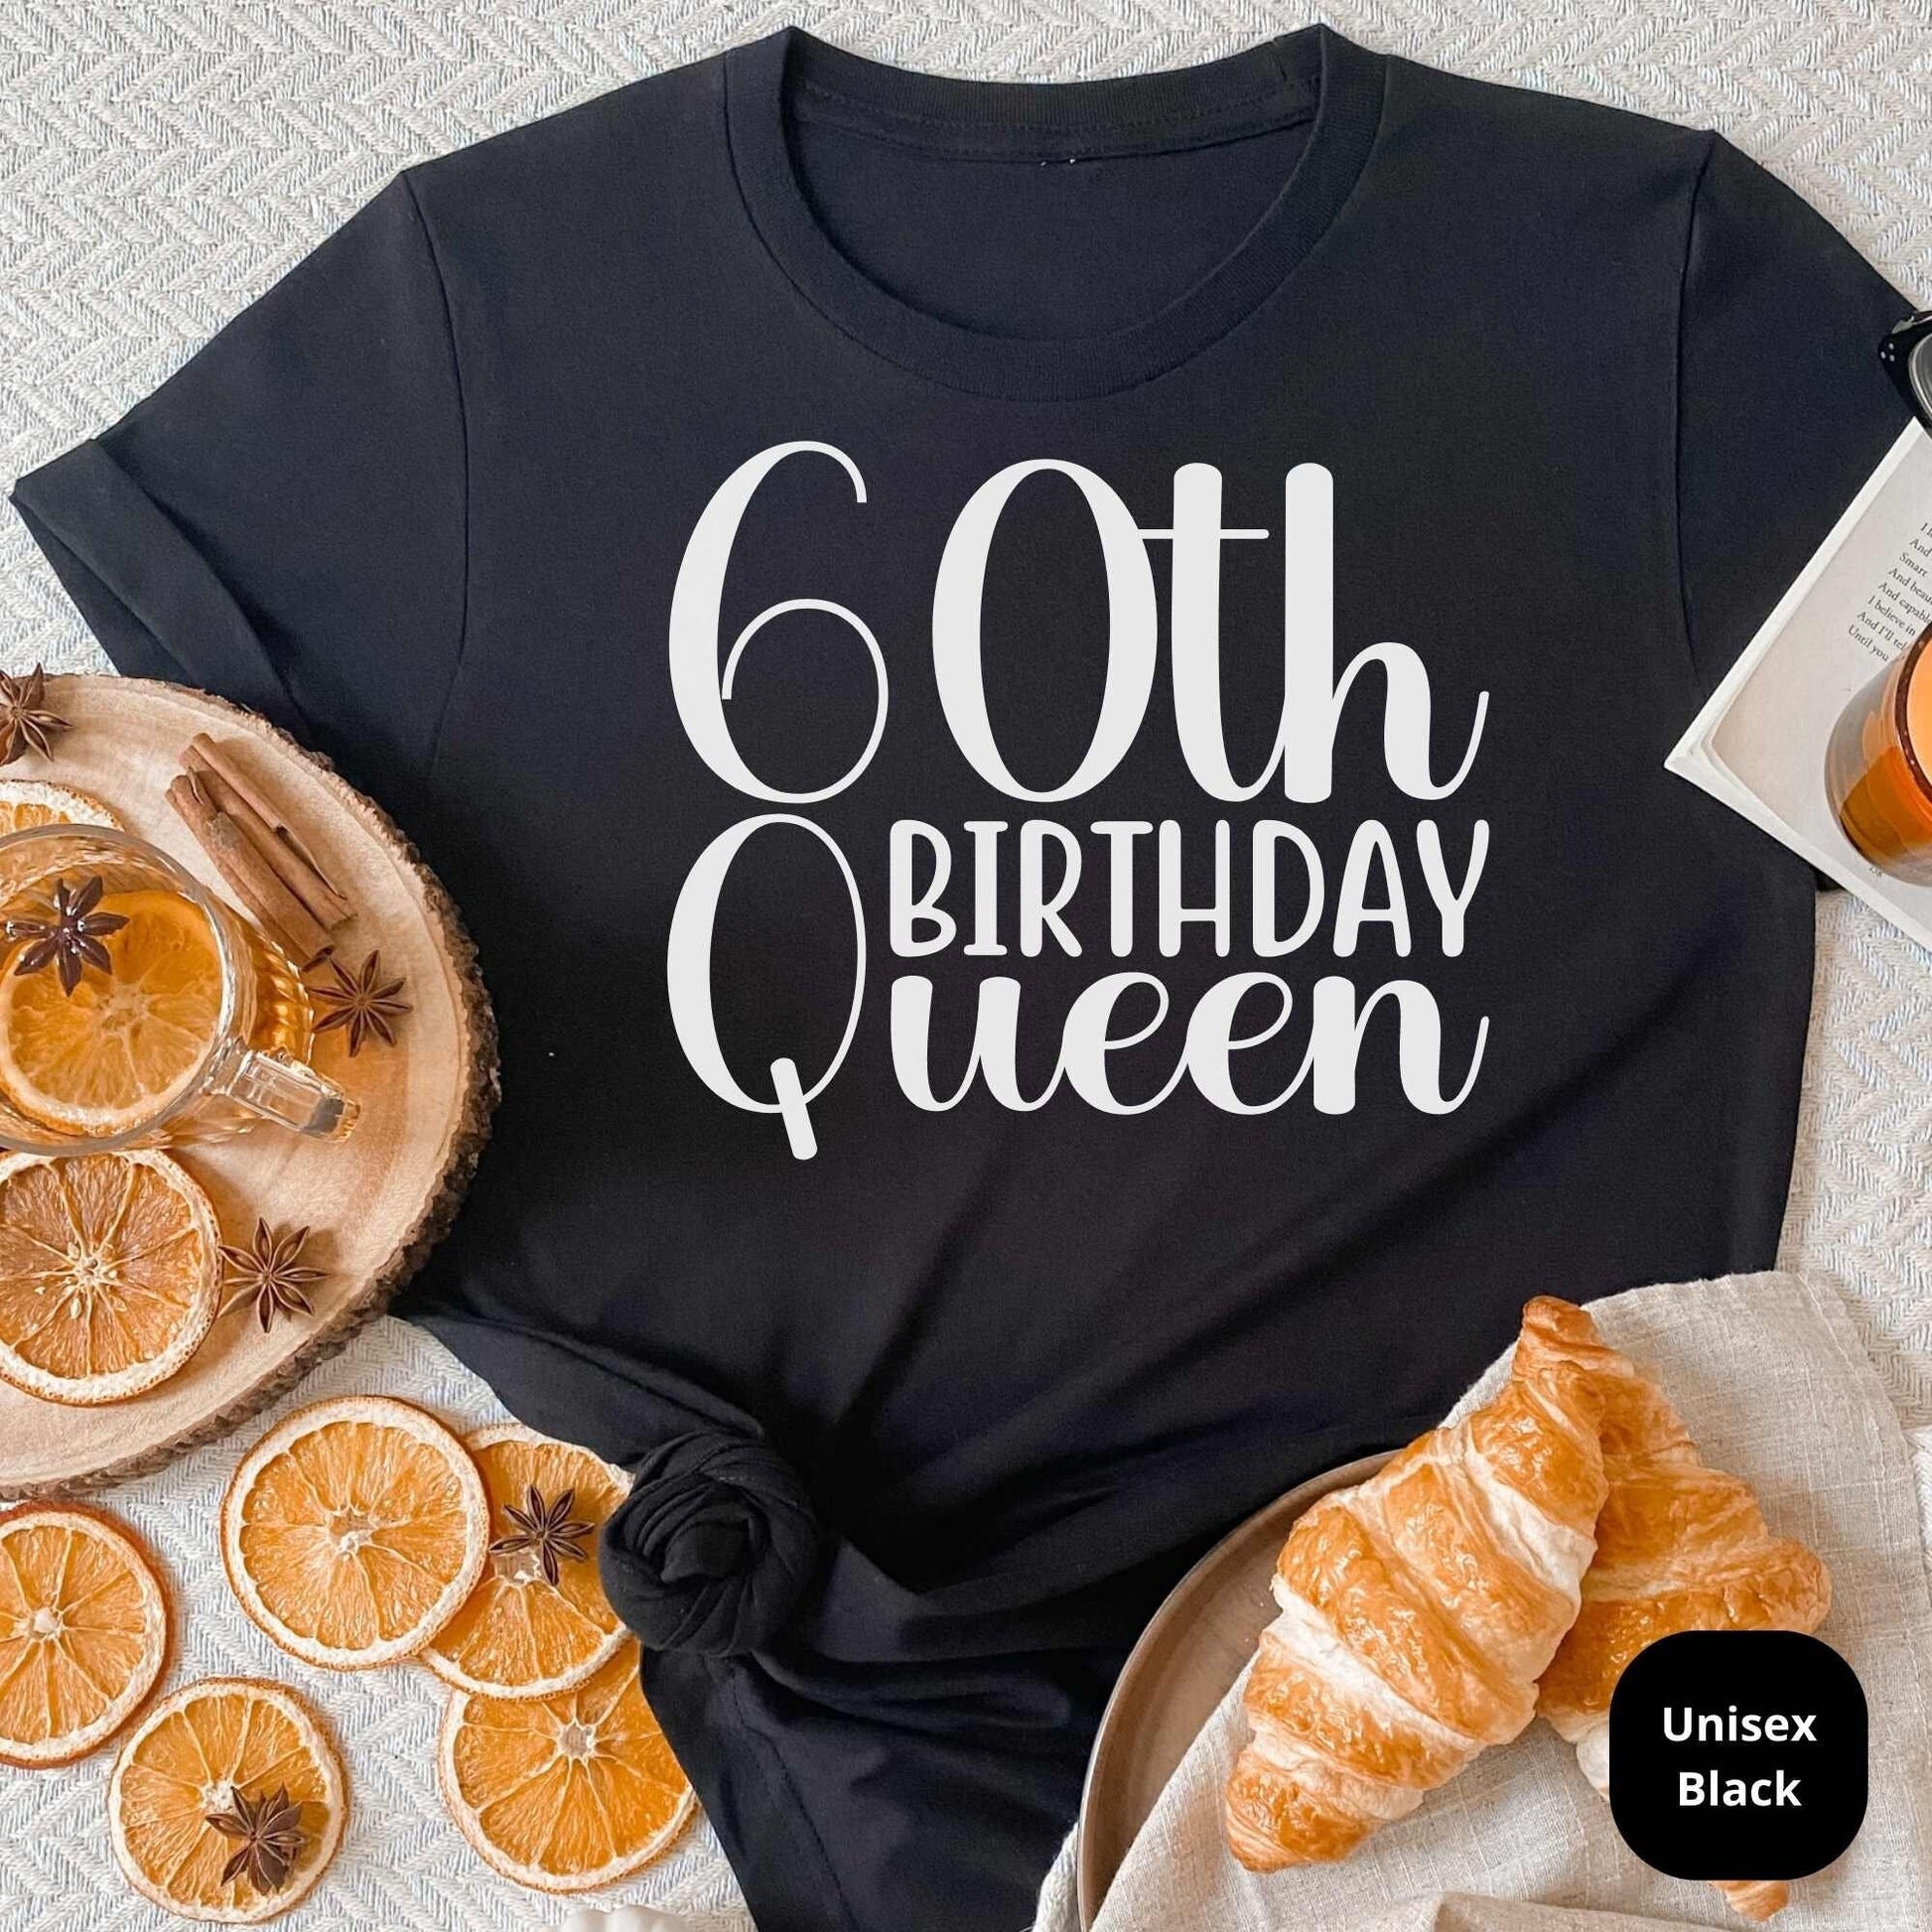 60th Birthday Shirt, 60th Birthday Gifts, Bday Queen Tee, Great Gift for Grandma, Mom, Aunties, Cousins & Loved Ones Bday Party Celebration